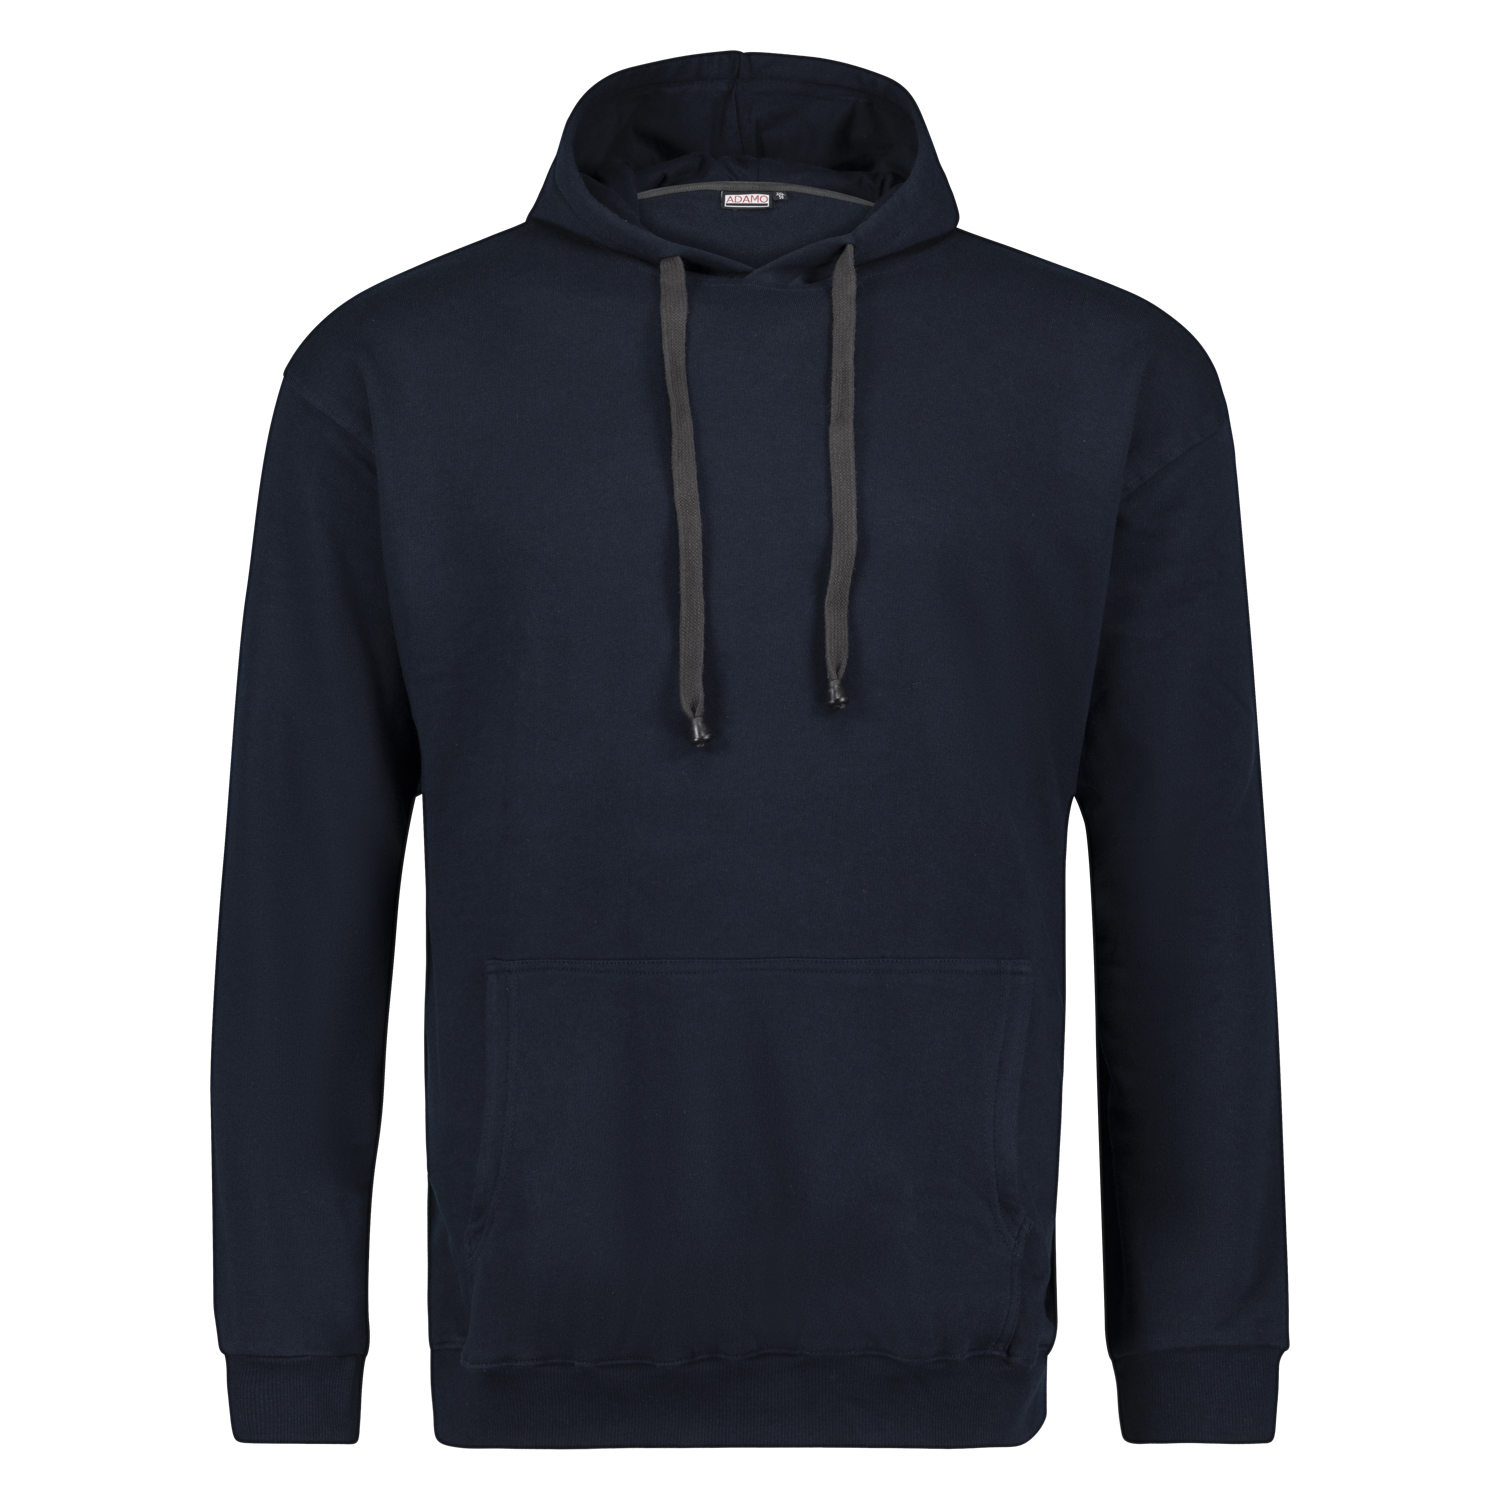 Hooded sweatshirt in navy series ATHEN by Adamo up to oversize 14XL